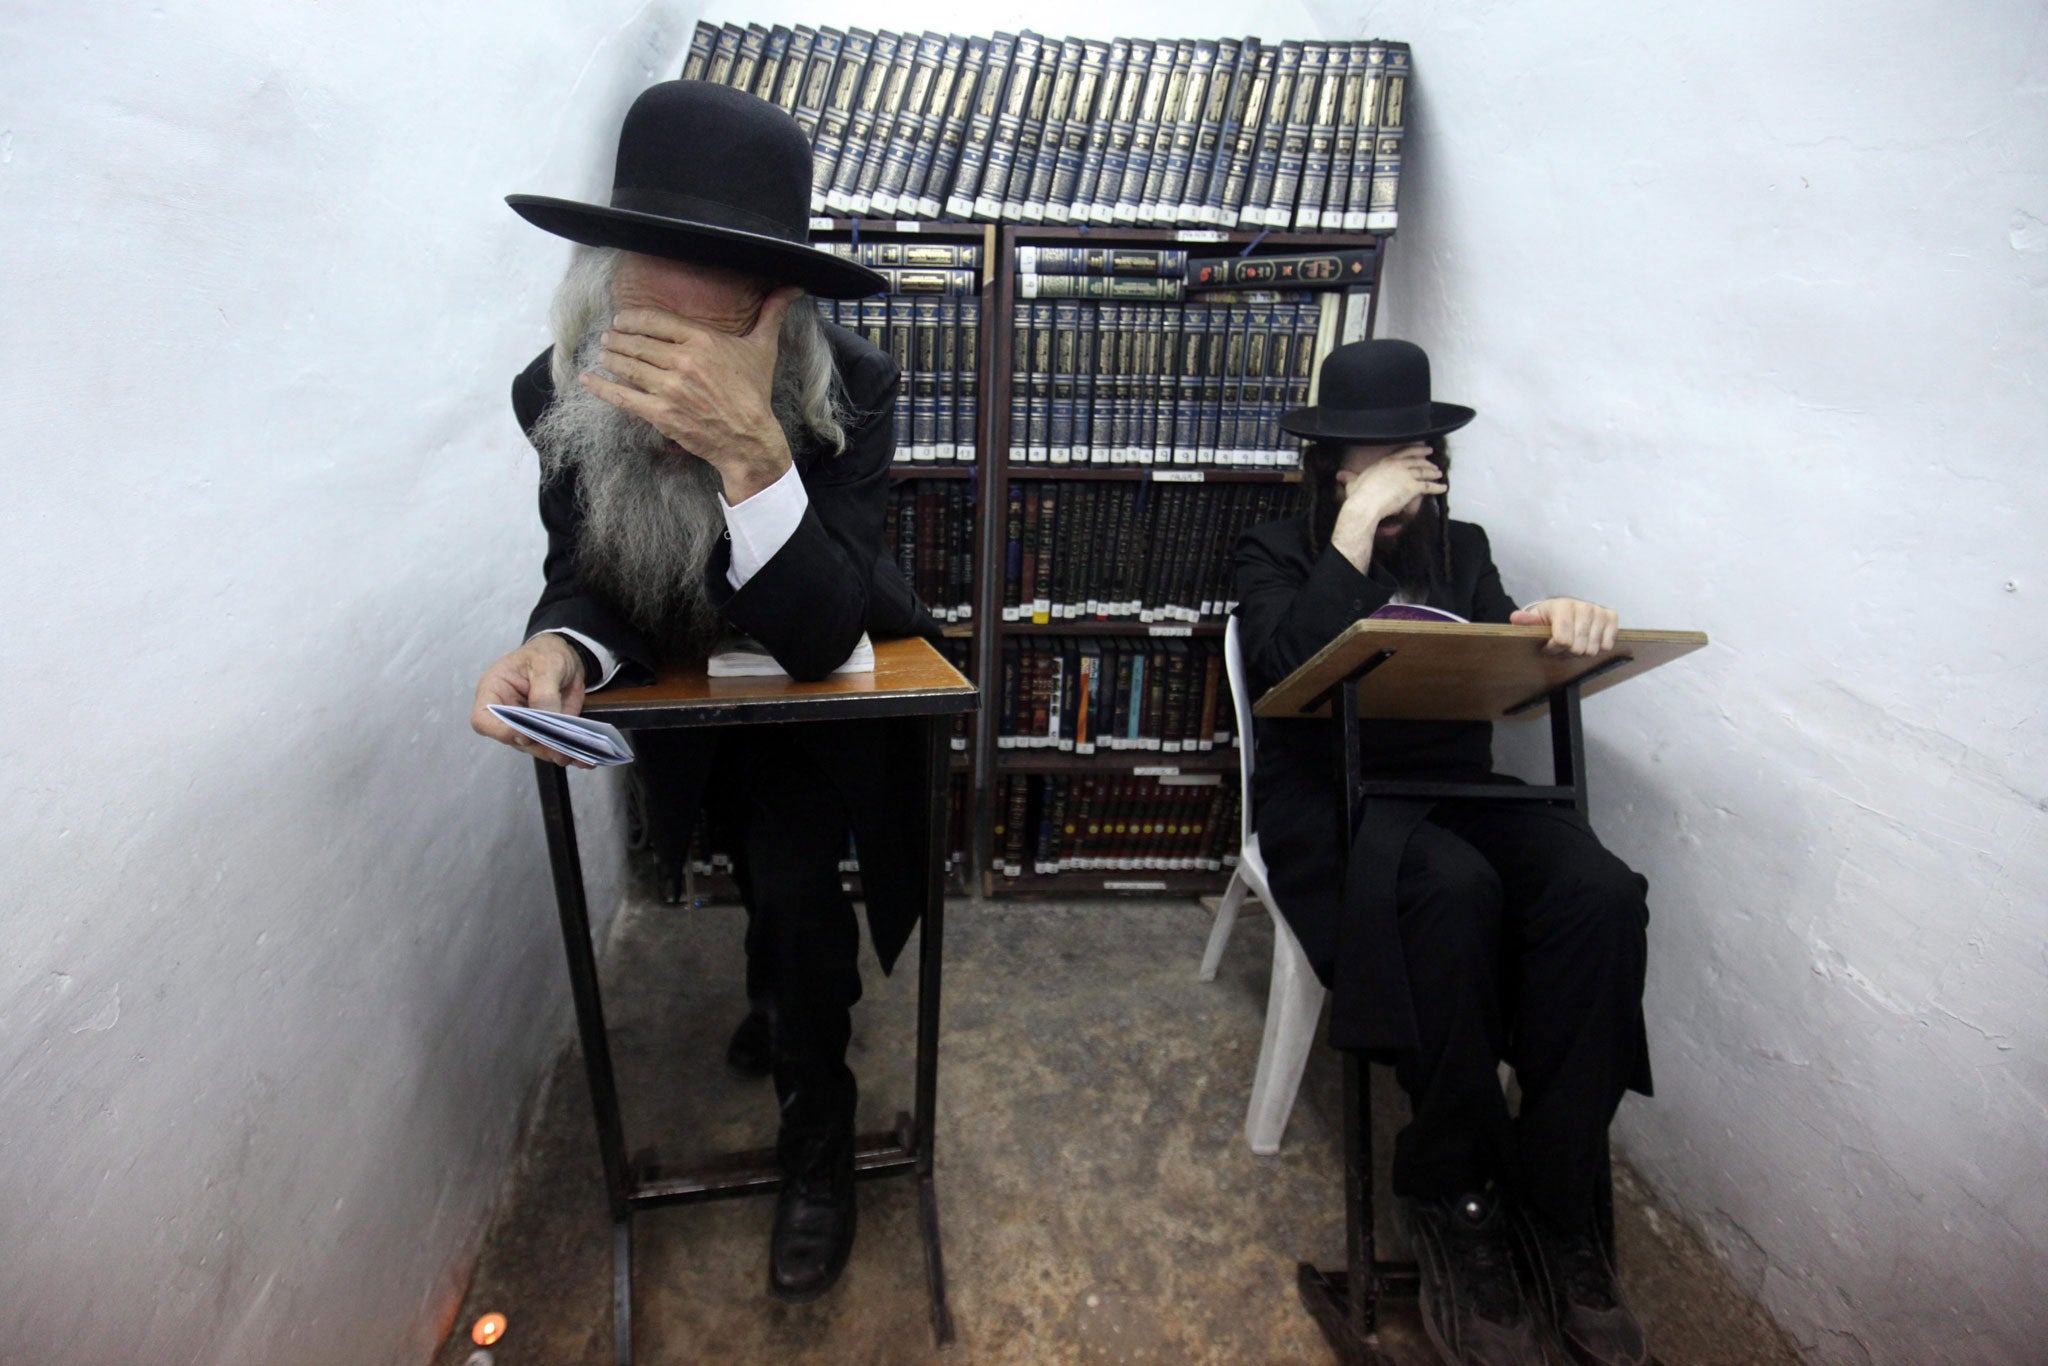 In or out? Ultra-Orthodox Jewish men read from a religious book